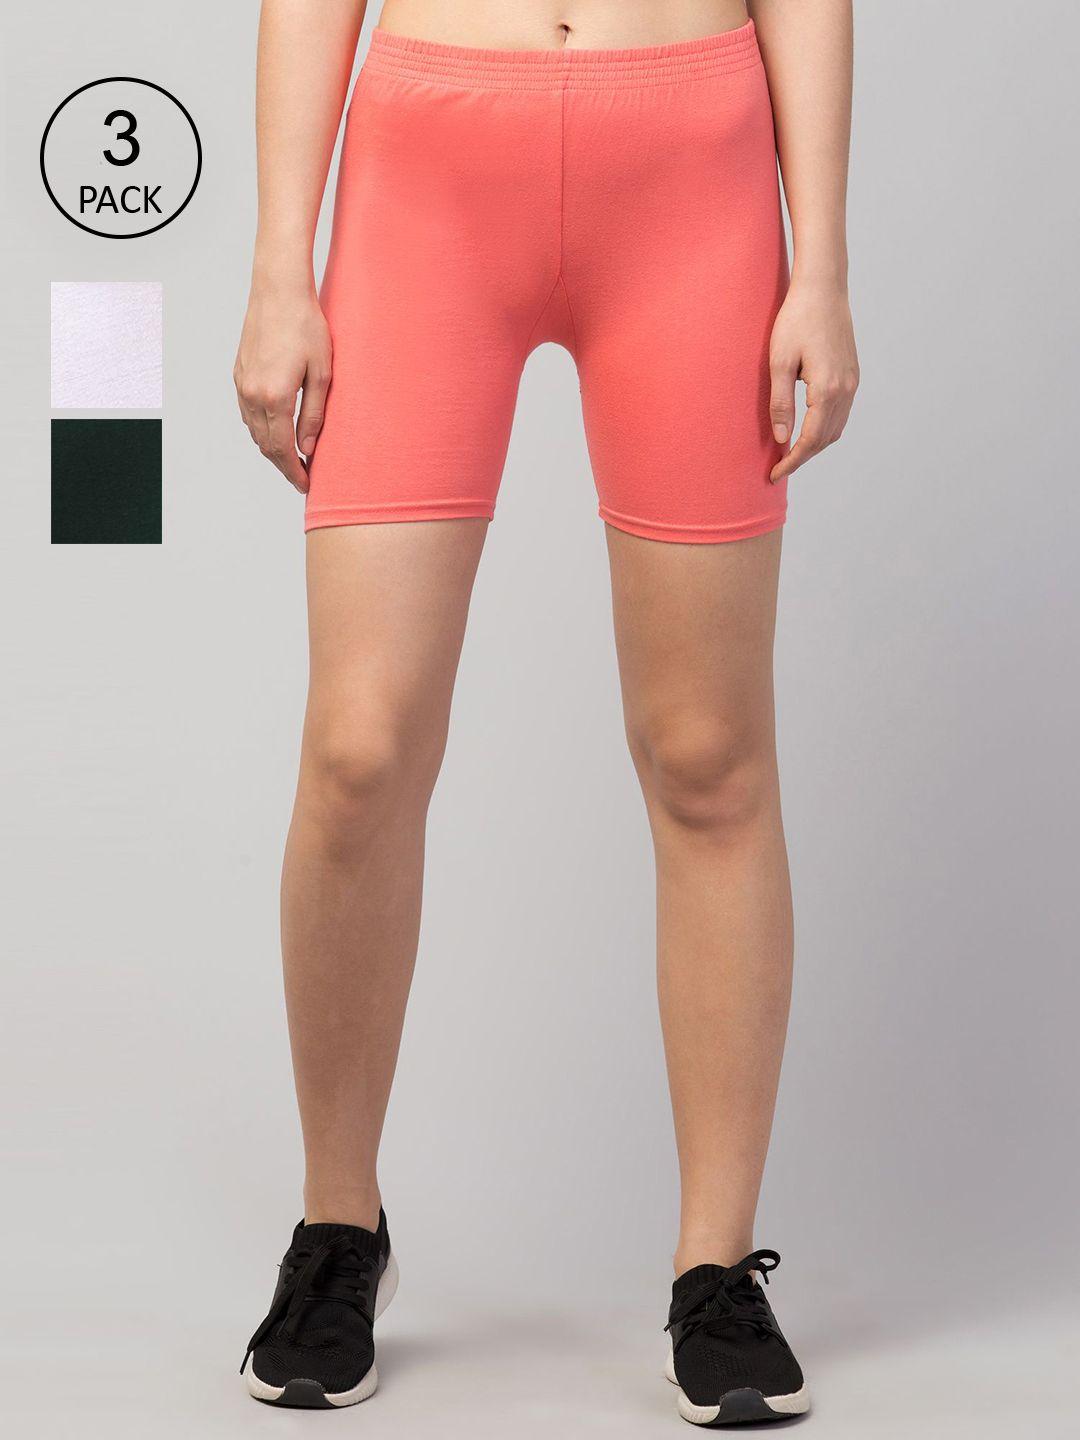 apraa-&-parma-pack-of-3-women-pink-solid-cotton-slim-fit-cycling-shorts